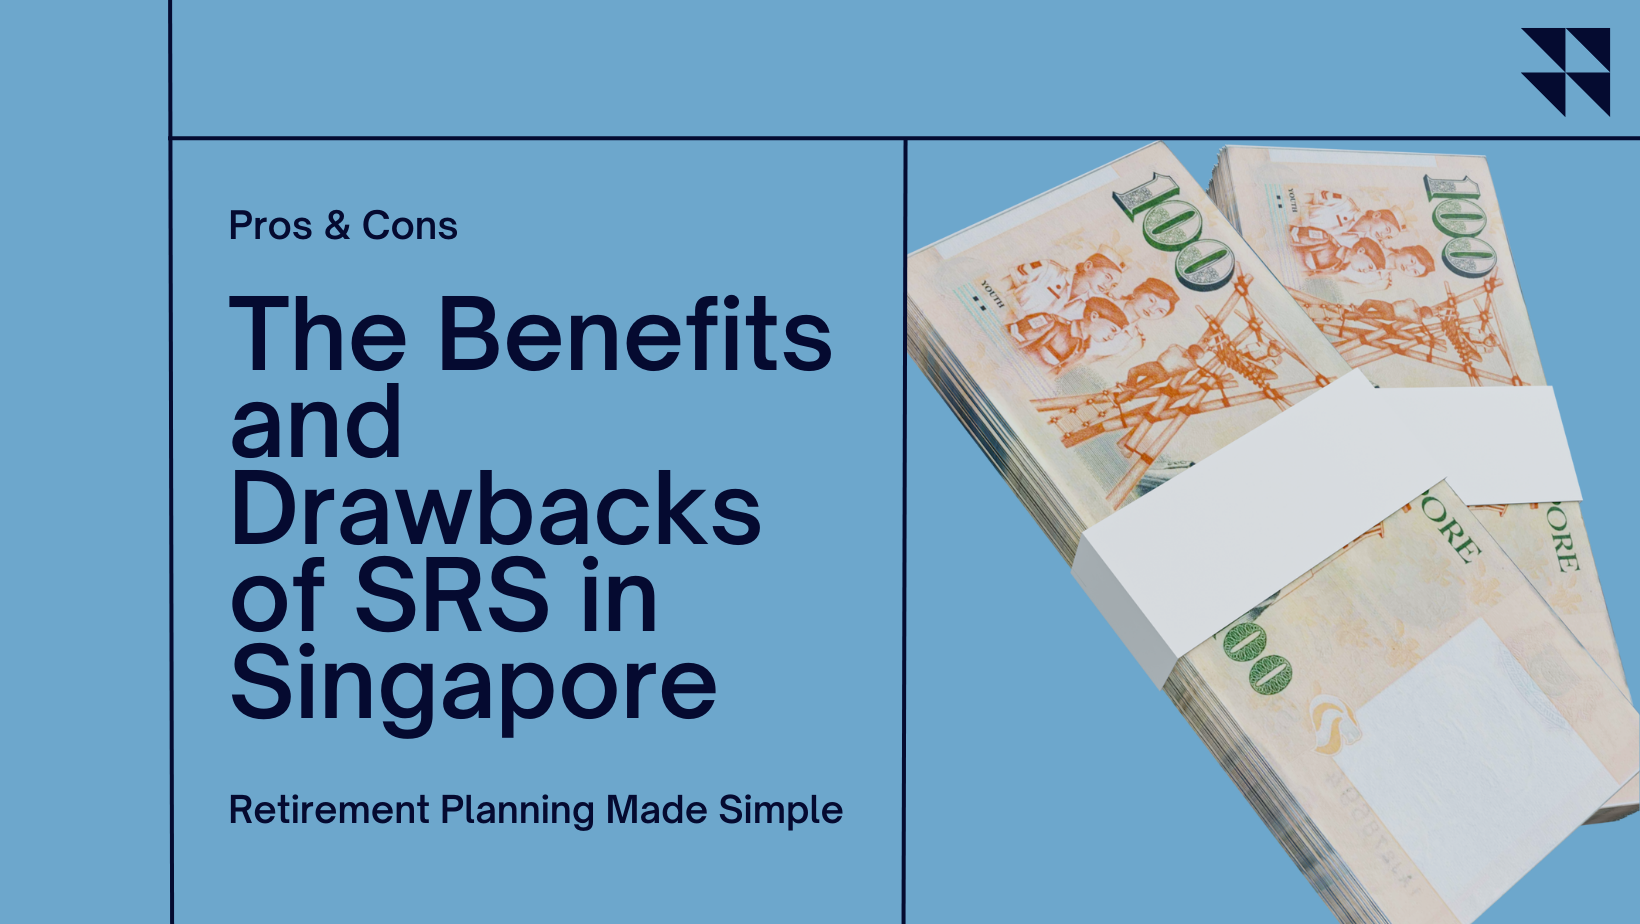 The Benefits and Drawbacks of SRS in Singapore